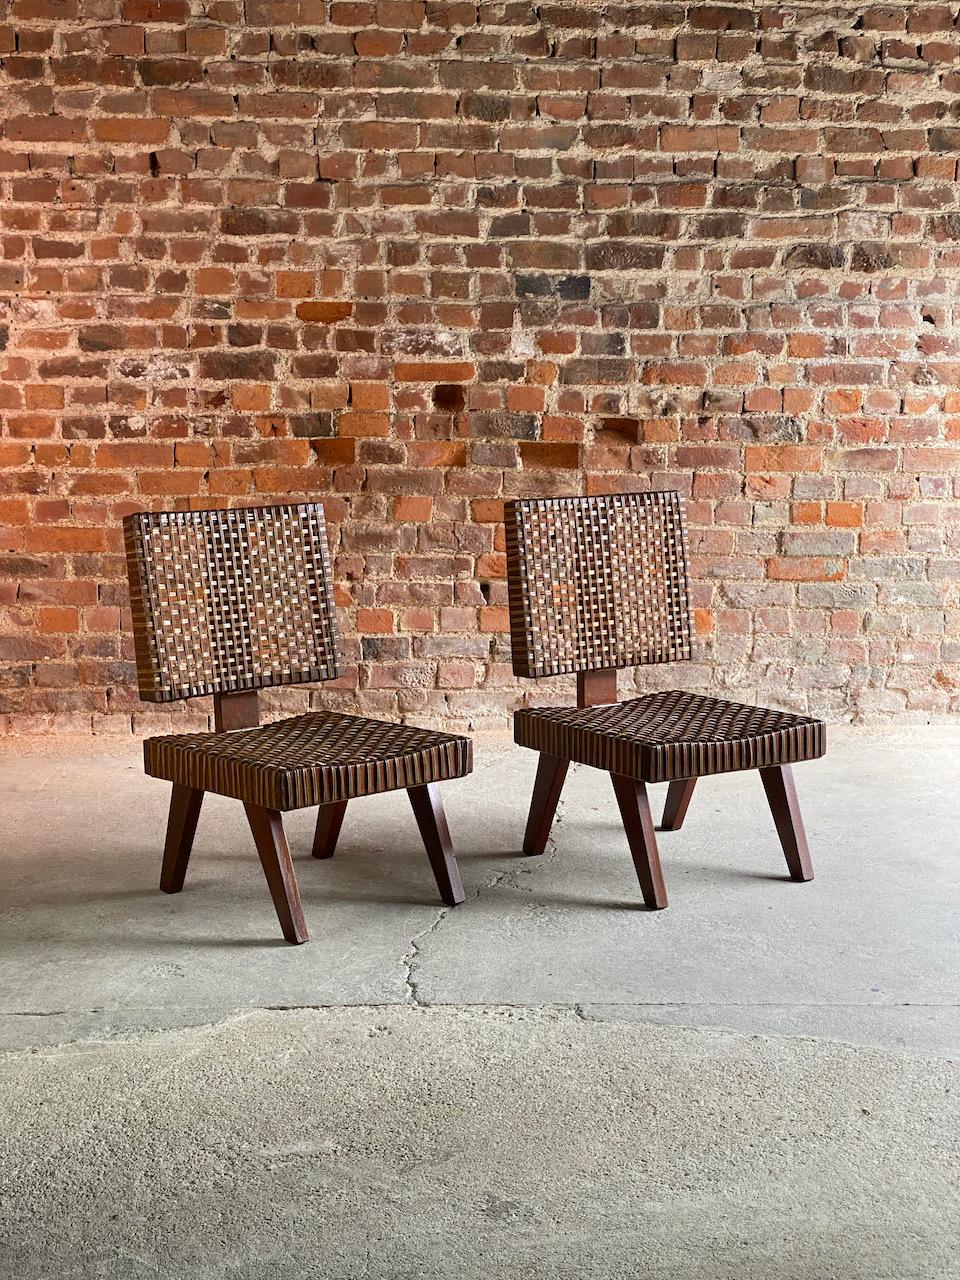 Pierre Jeanneret rare lounge chairs Chandigarh Circa 1955-56

Magnificent and important mid twentieth century Pierre Jeanneret (1896 - 1967) rare Lounge Chairs Oak and Cane Chandigarh, India Circa 1955-56, very few examples of this chair design